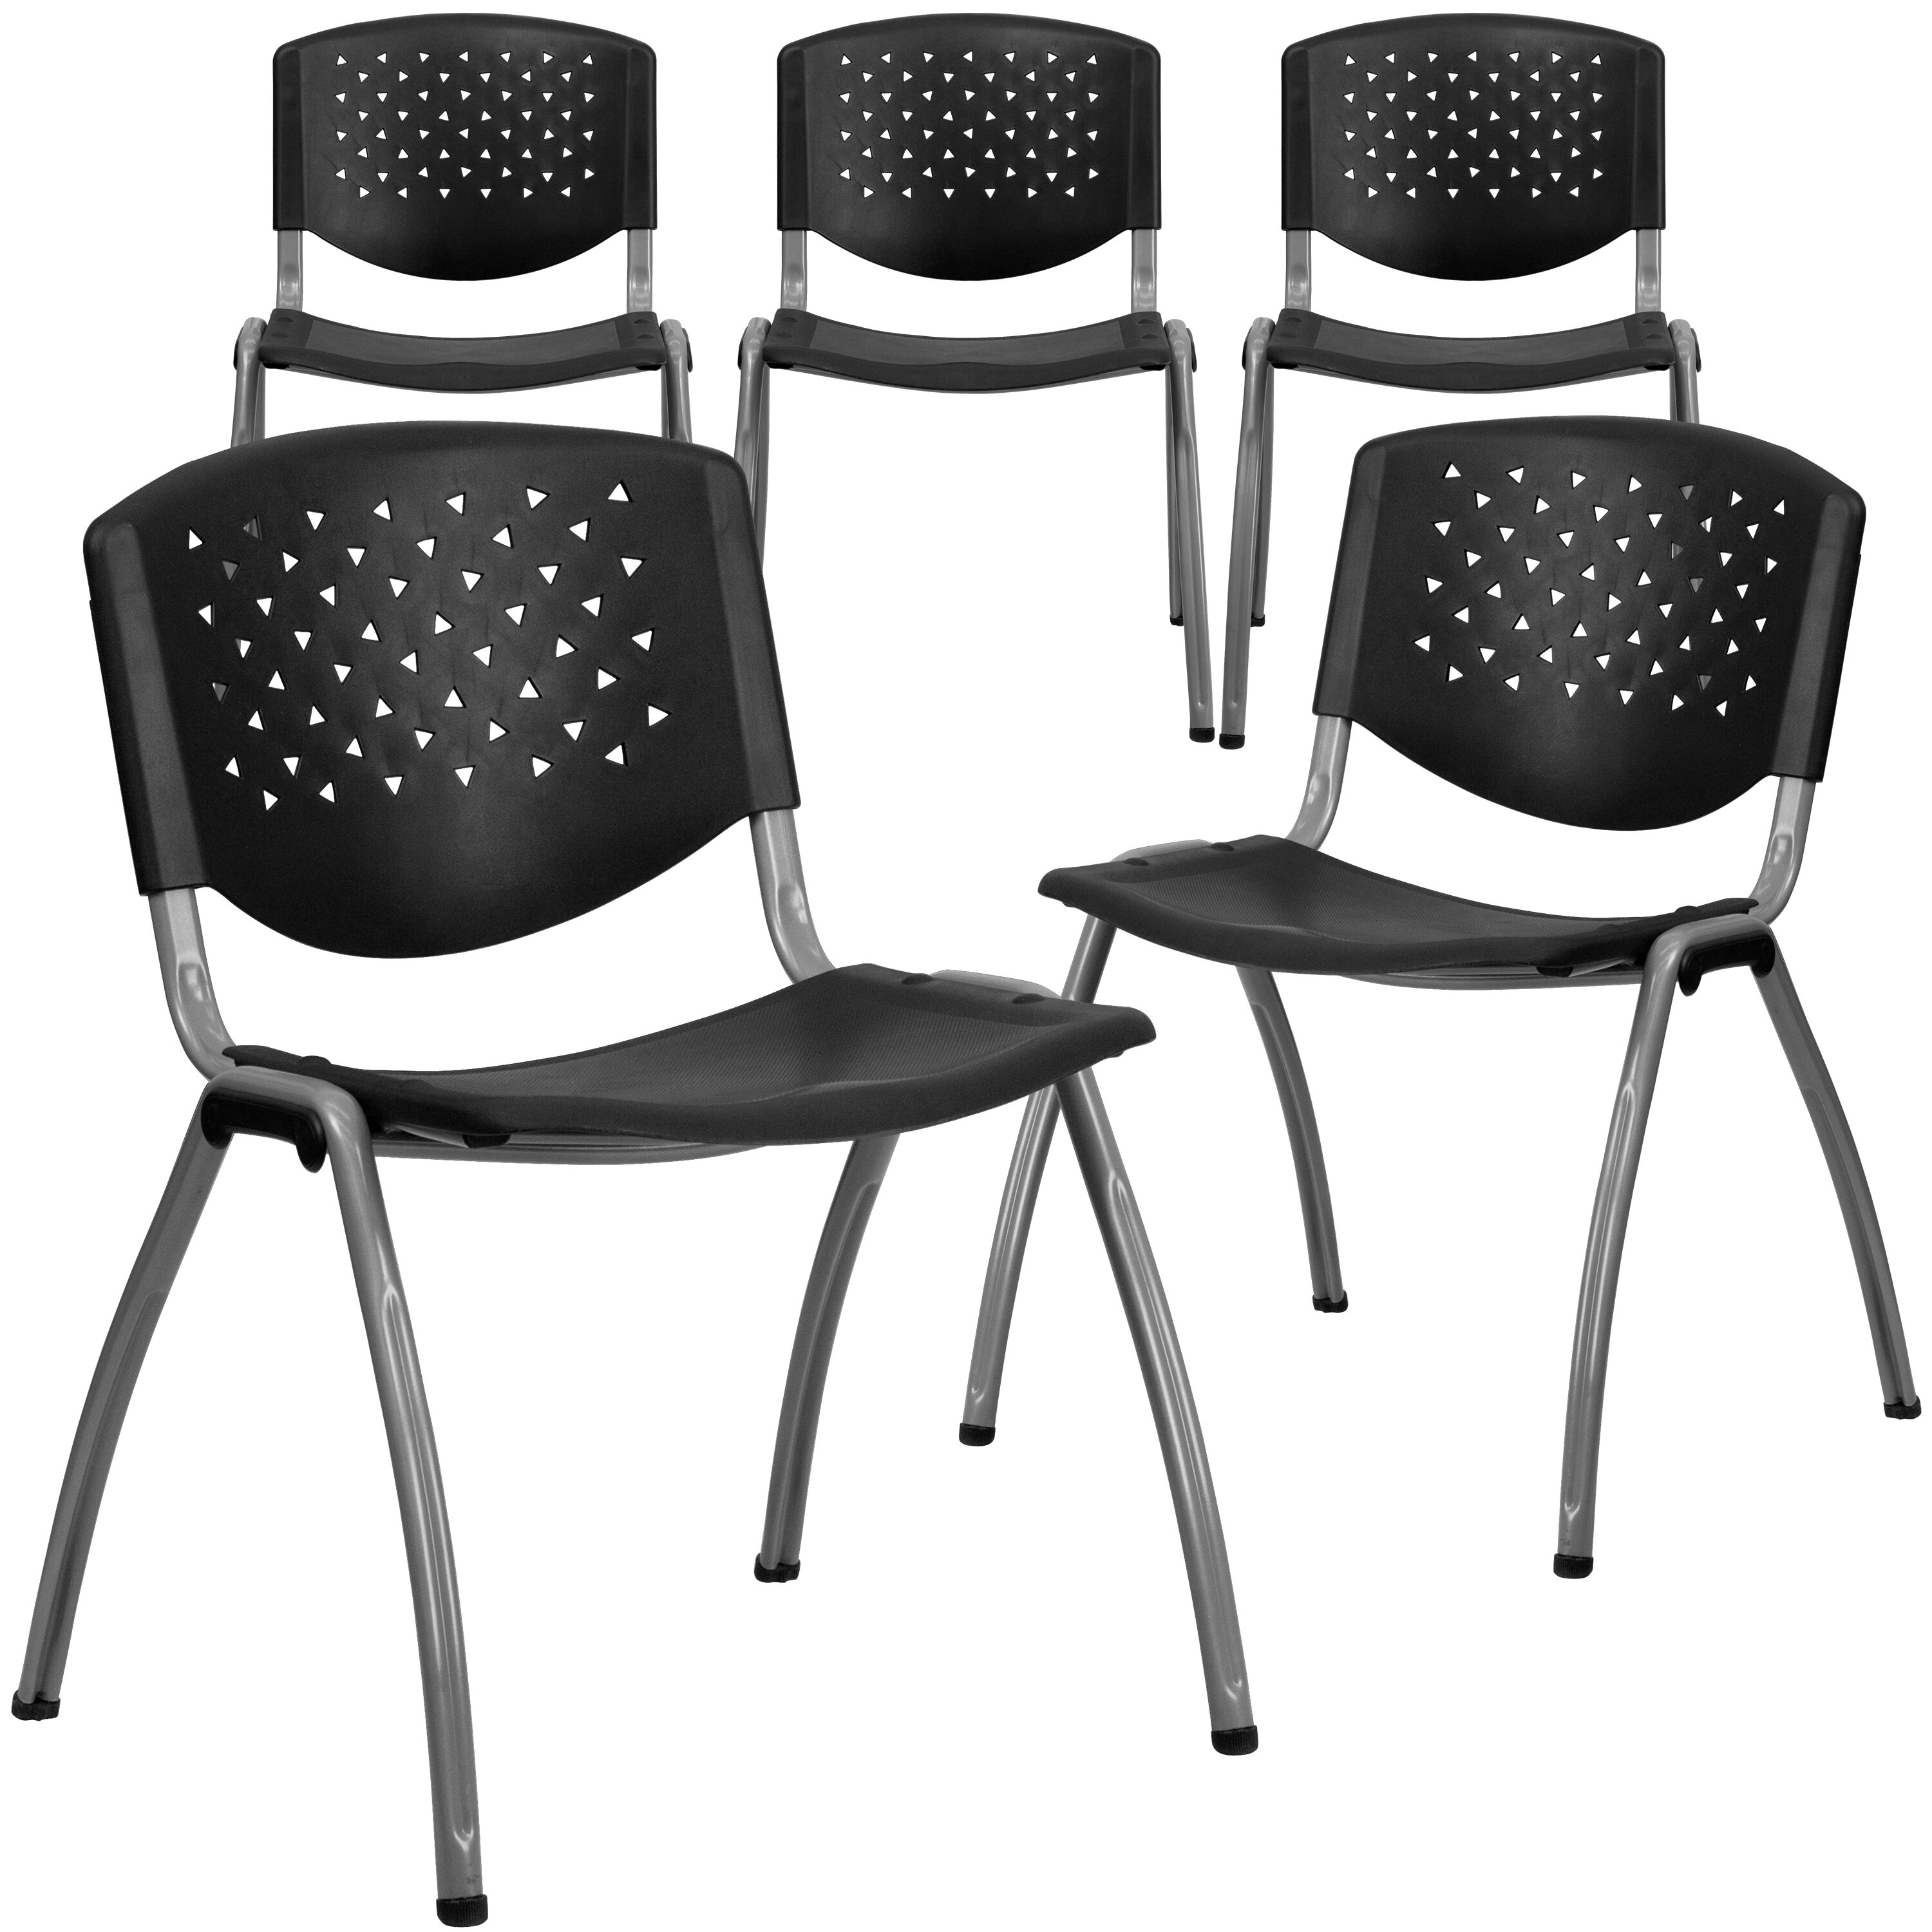 Oliverson 880 lb. Capacity Plastic Stack Chair with Powder Coated Frame